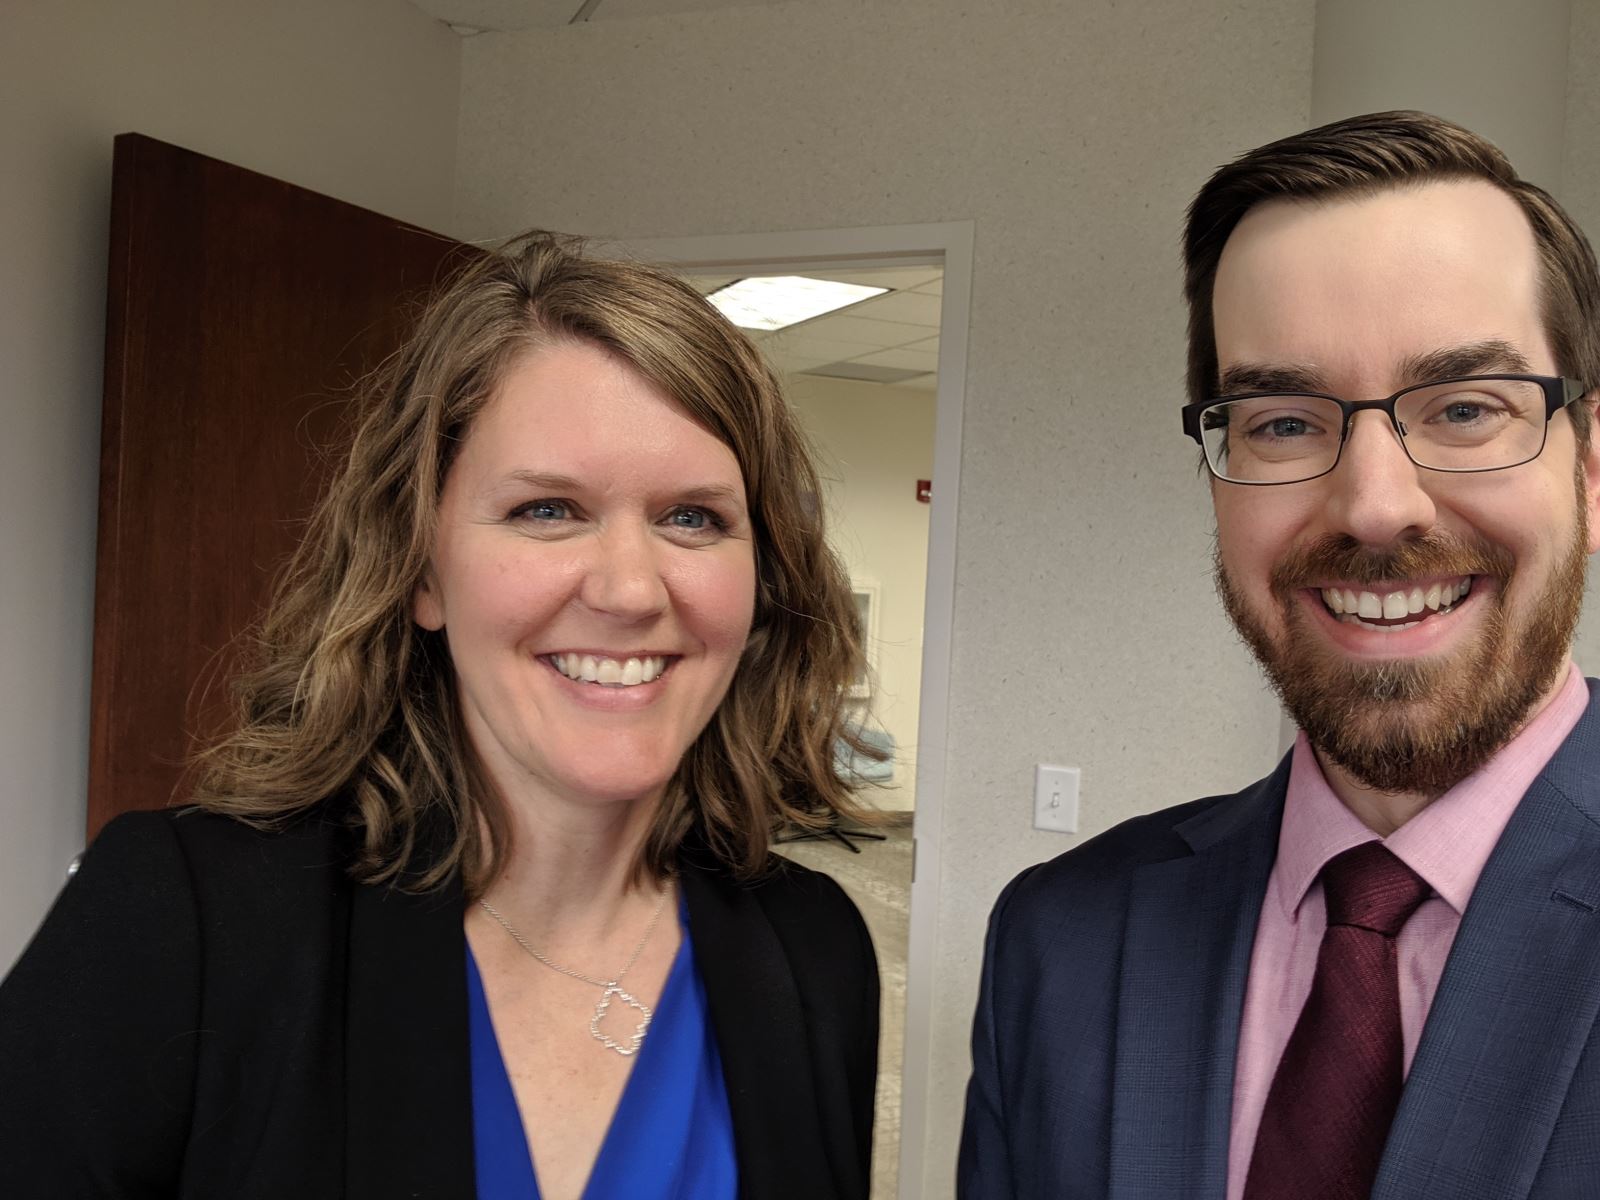 Kerri Johannsen and Michael Schmidt at the settlement conference with Alliant Energy on 10.11.19